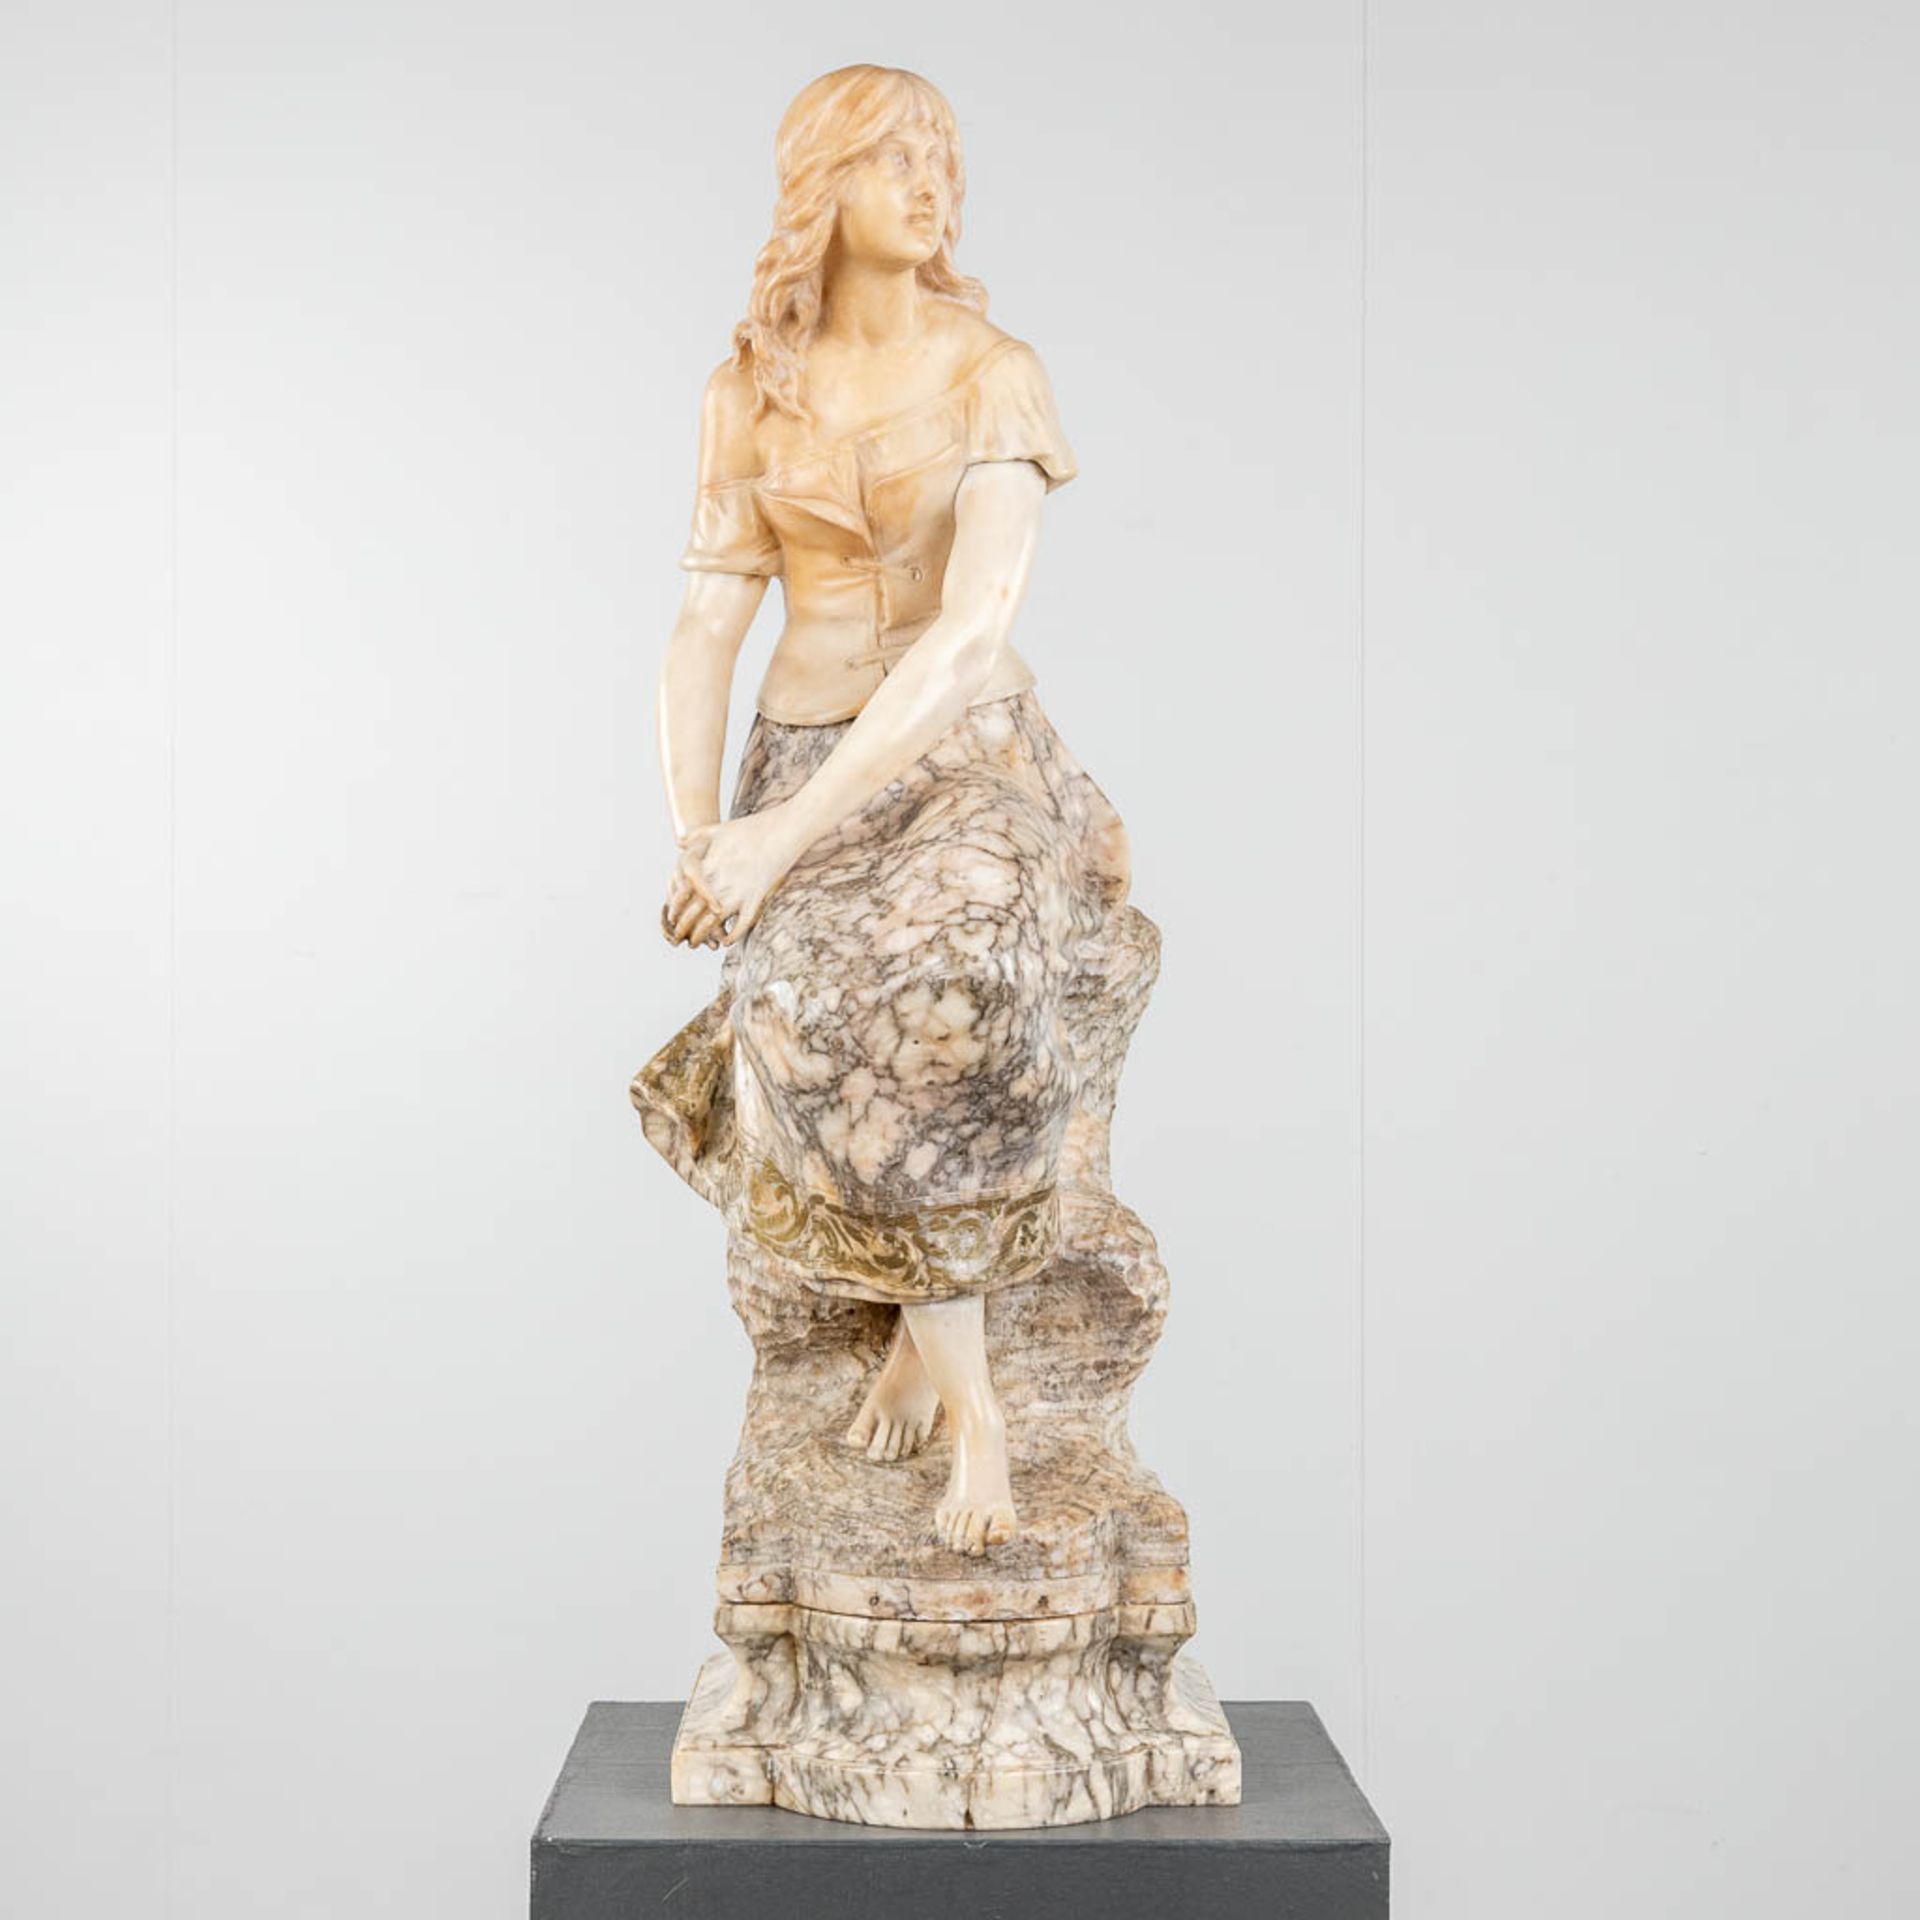 An exceptional statue of a lady, seated on a rock. Sculptured alabaster. 19th century. (L: 37 x W: 3